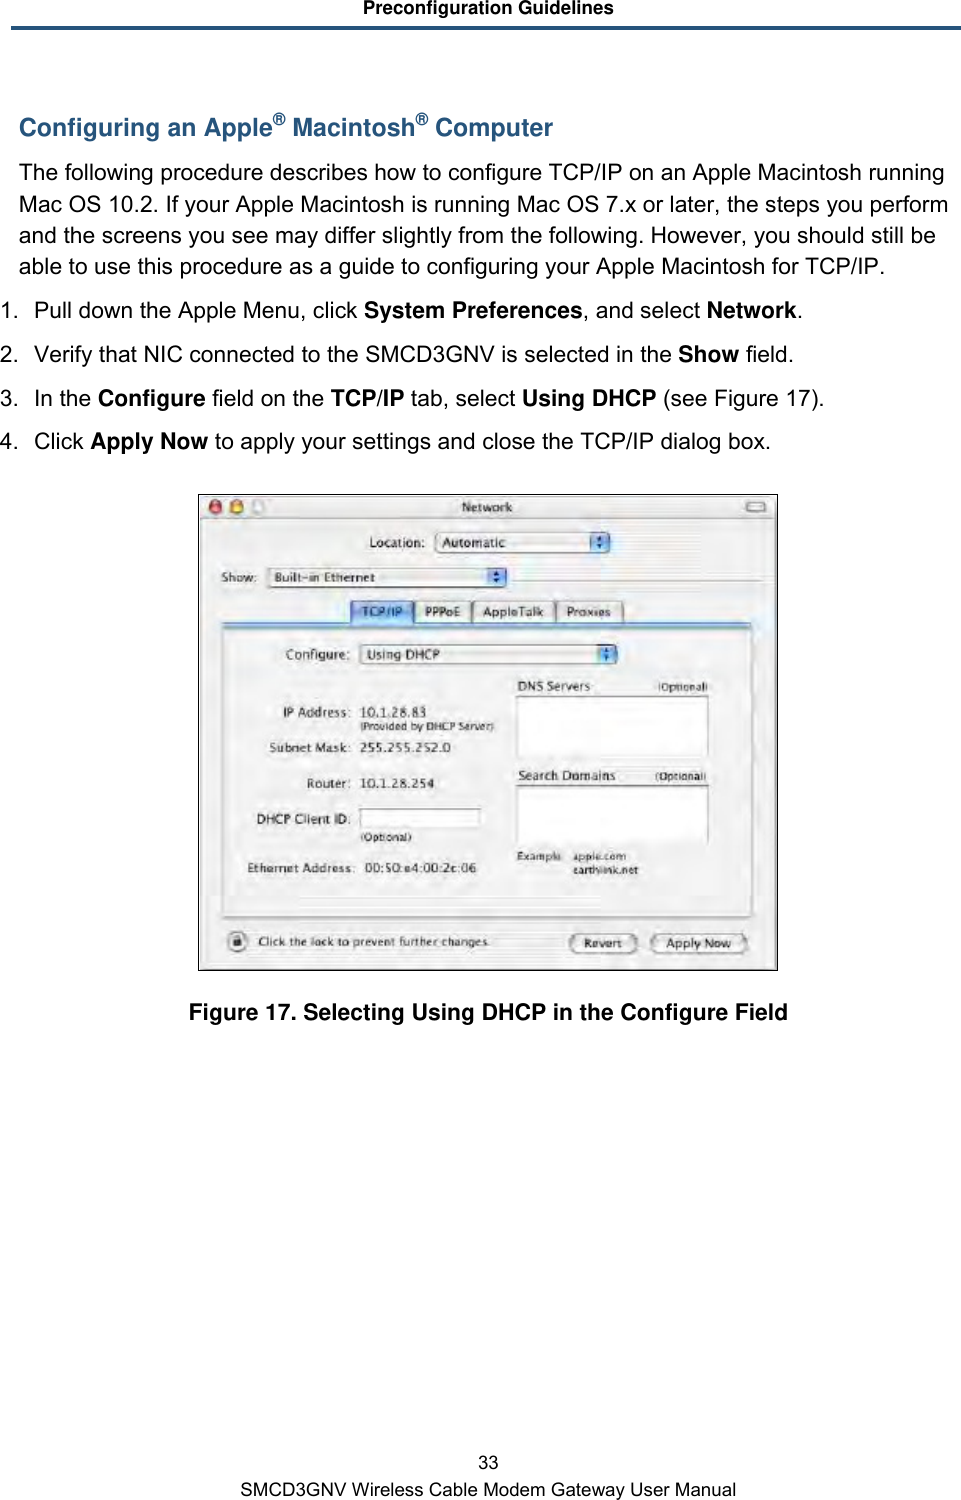 Preconfiguration Guidelines 33 SMCD3GNV Wireless Cable Modem Gateway User Manual Configuring an Apple® Macintosh® Computer The following procedure describes how to configure TCP/IP on an Apple Macintosh running Mac OS 10.2. If your Apple Macintosh is running Mac OS 7.x or later, the steps you perform and the screens you see may differ slightly from the following. However, you should still be able to use this procedure as a guide to configuring your Apple Macintosh for TCP/IP. 1. Pull down the Apple Menu, click System Preferences, and select Network.  2. Verify that NIC connected to the SMCD3GNV is selected in the Show field. 3. In the Configure field on the TCP/IP tab, select Using DHCP (see Figure 17). 4. Click Apply Now to apply your settings and close the TCP/IP dialog box.  Figure 17. Selecting Using DHCP in the Configure Field 